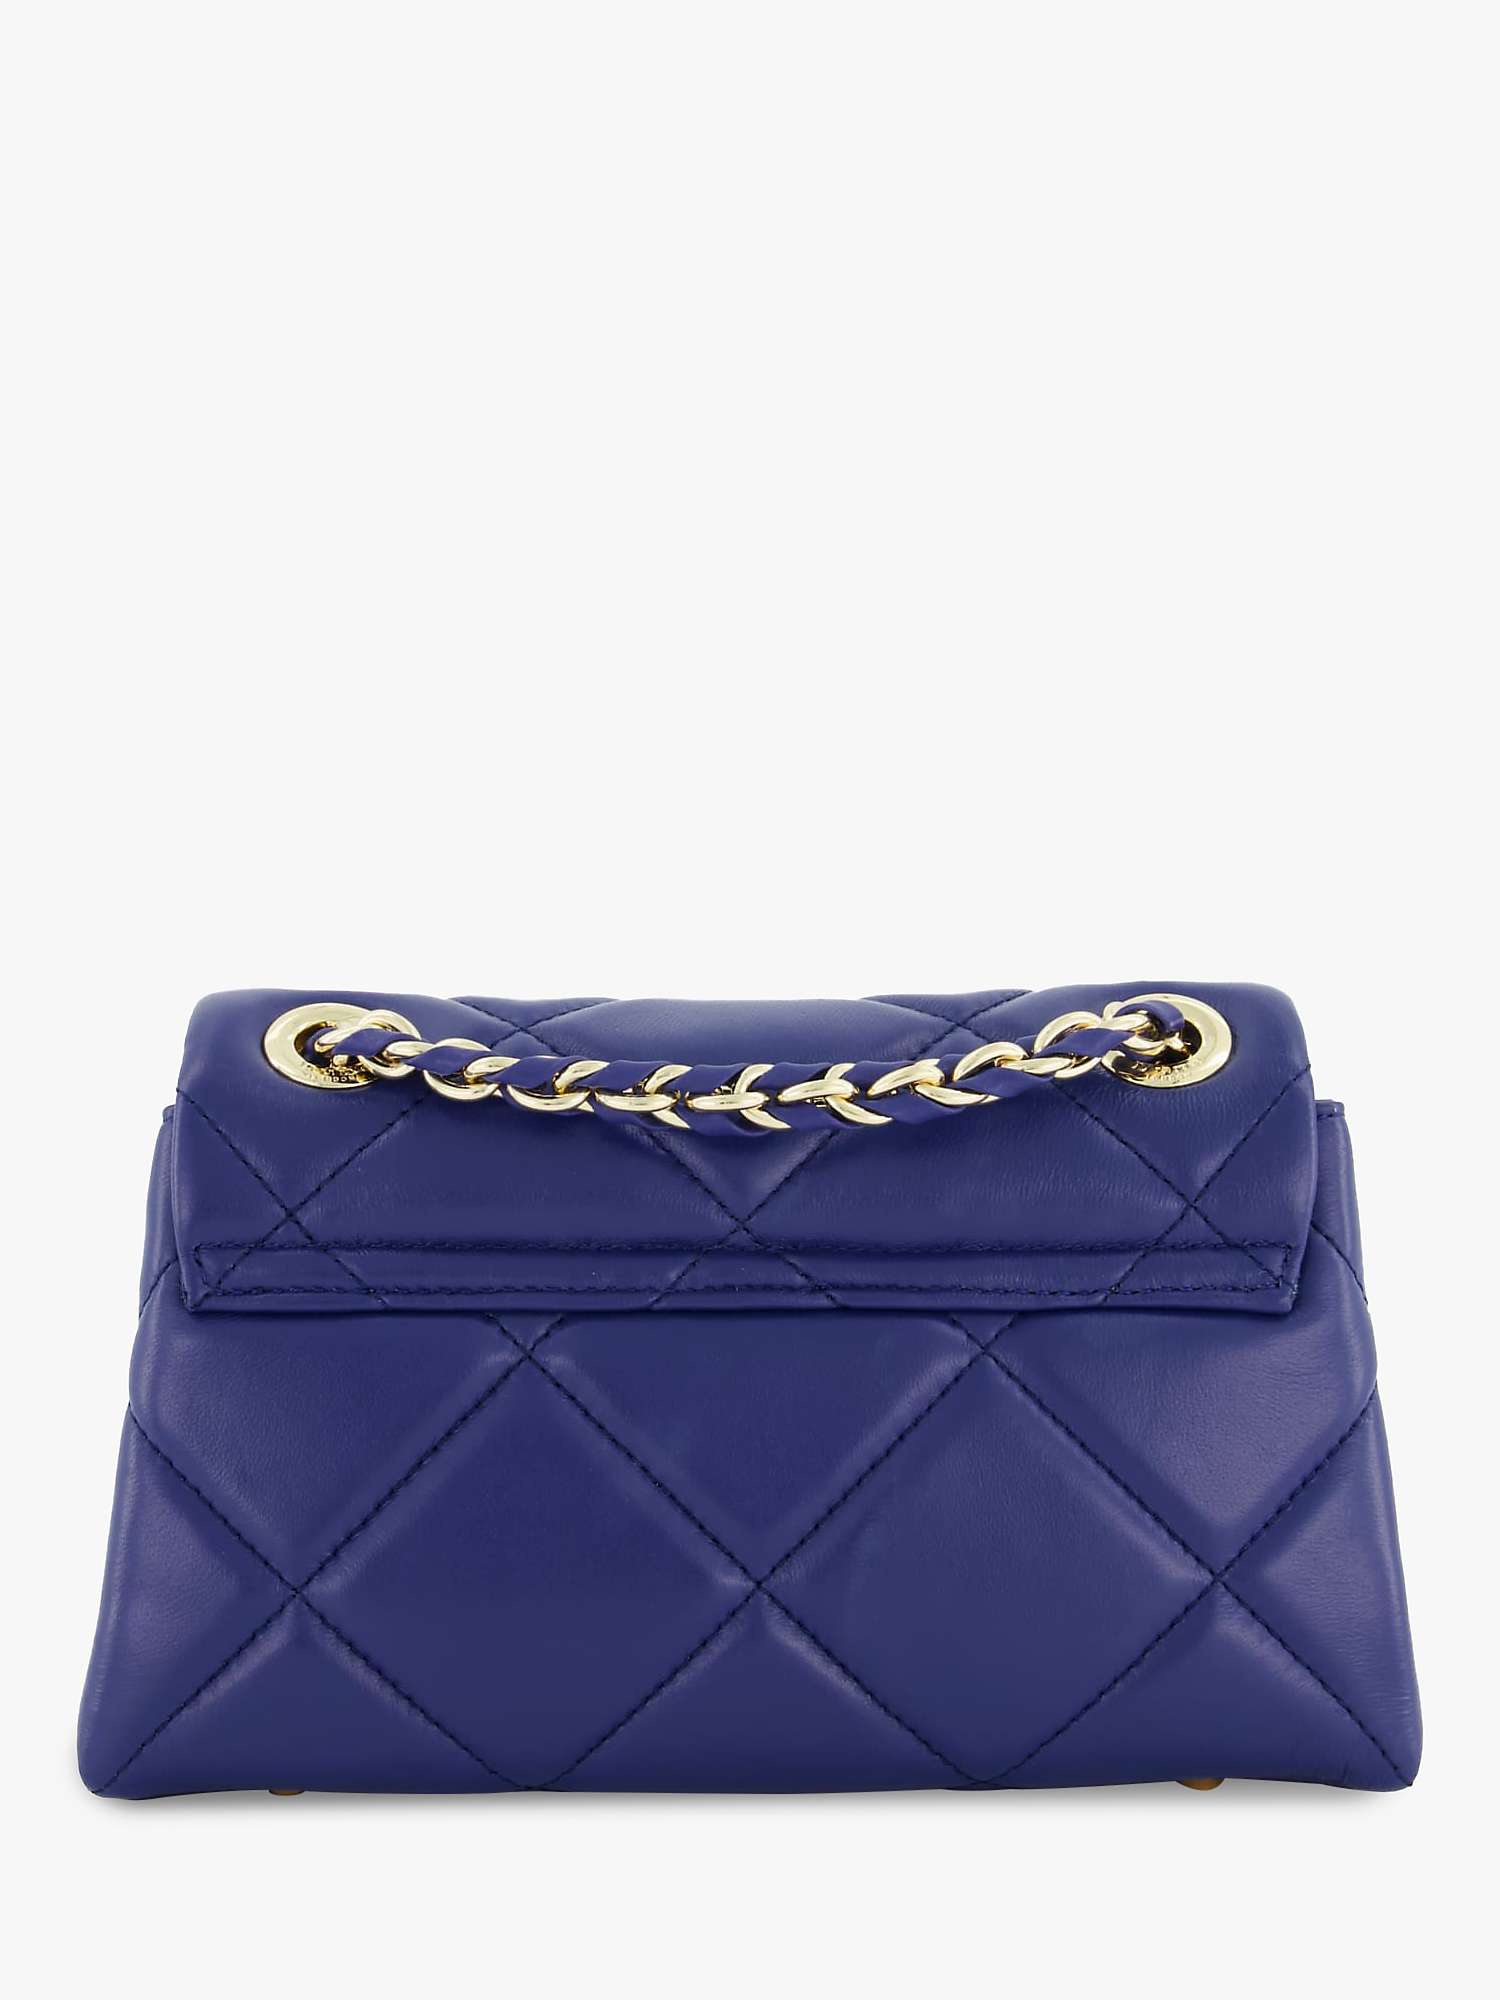 Buy Dune Duchess Small Quilted Leather Shoulder Bag Online at johnlewis.com